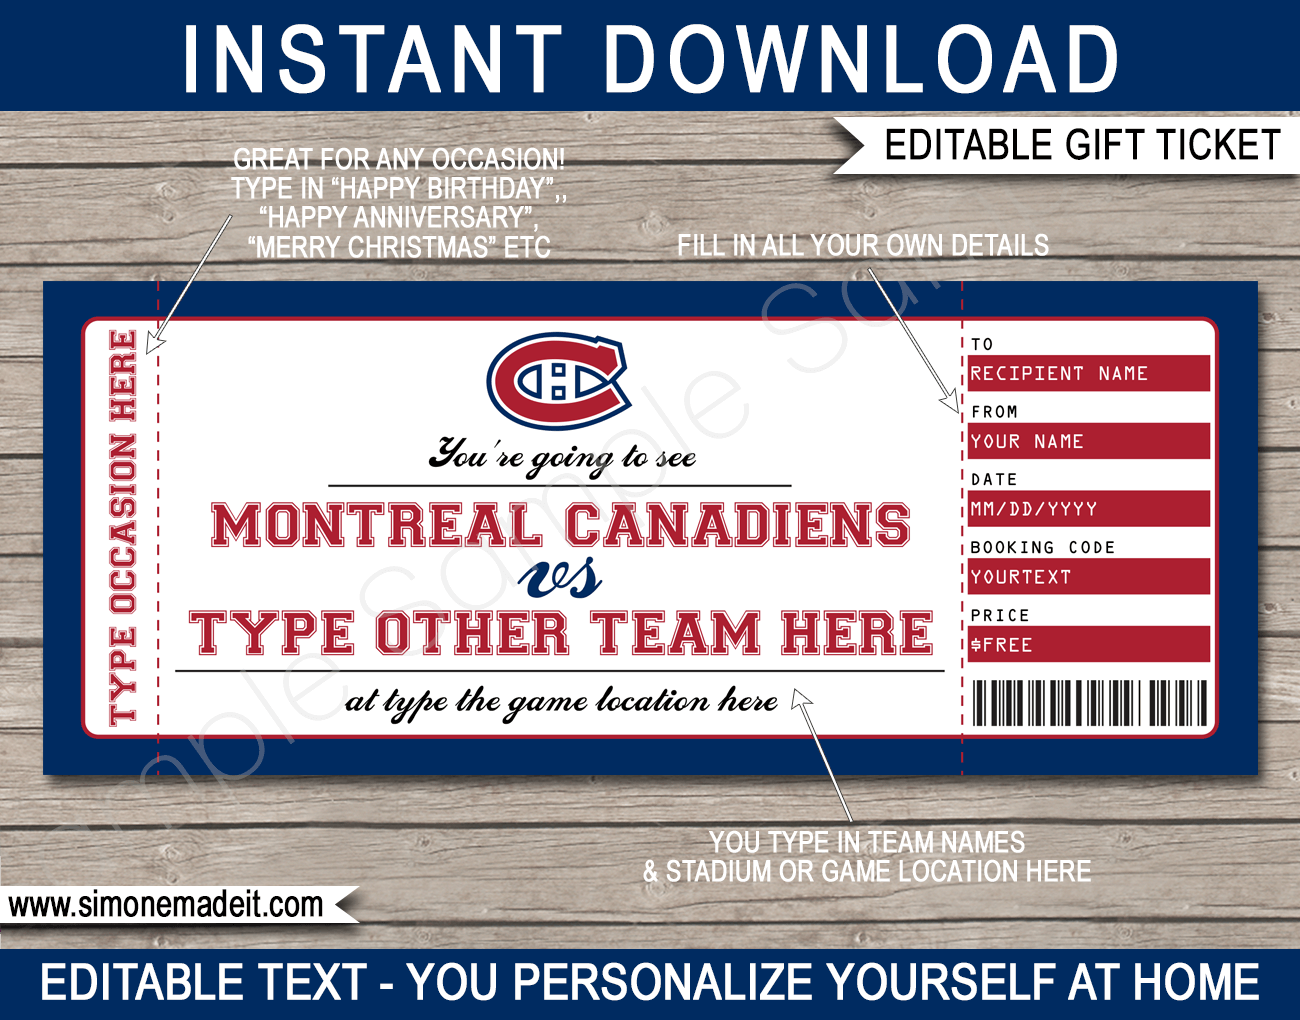 Buy Tickets for Montreal Canadiens NHL Games